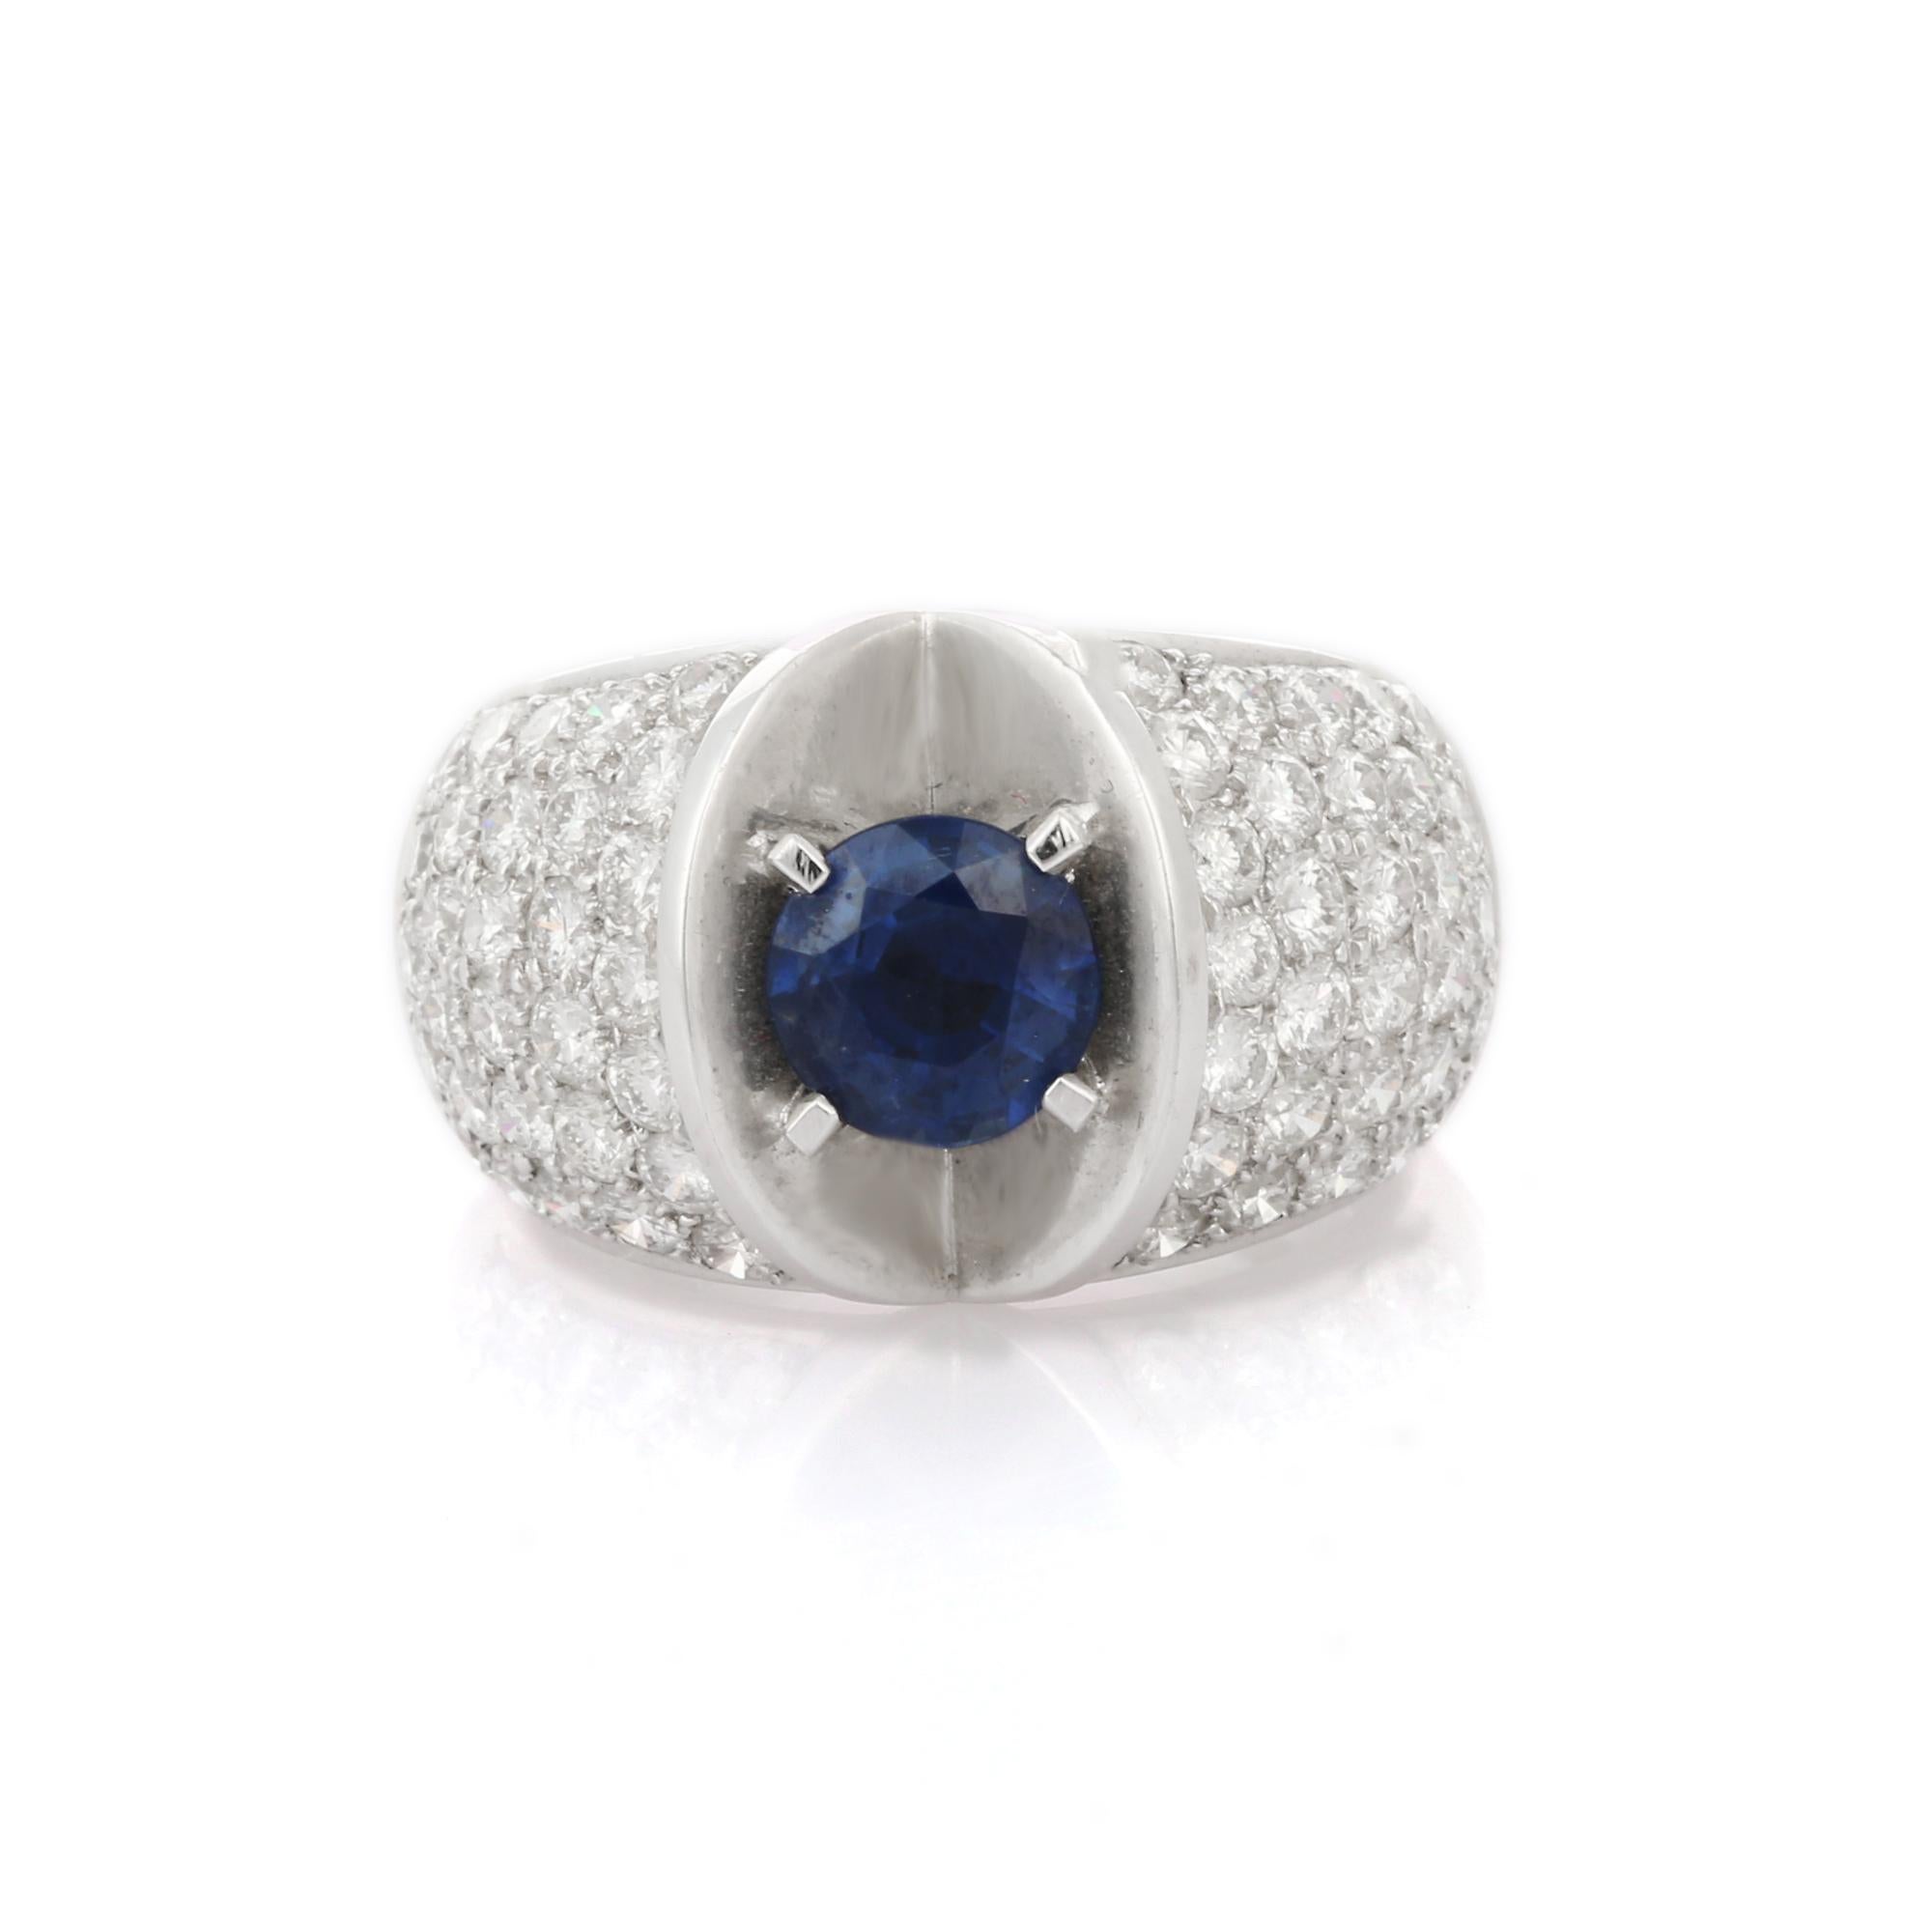 For Sale:  Sapphire and Diamond Designer Bold Ring in 18K White Gold, Wedding Cocktail Ring 2